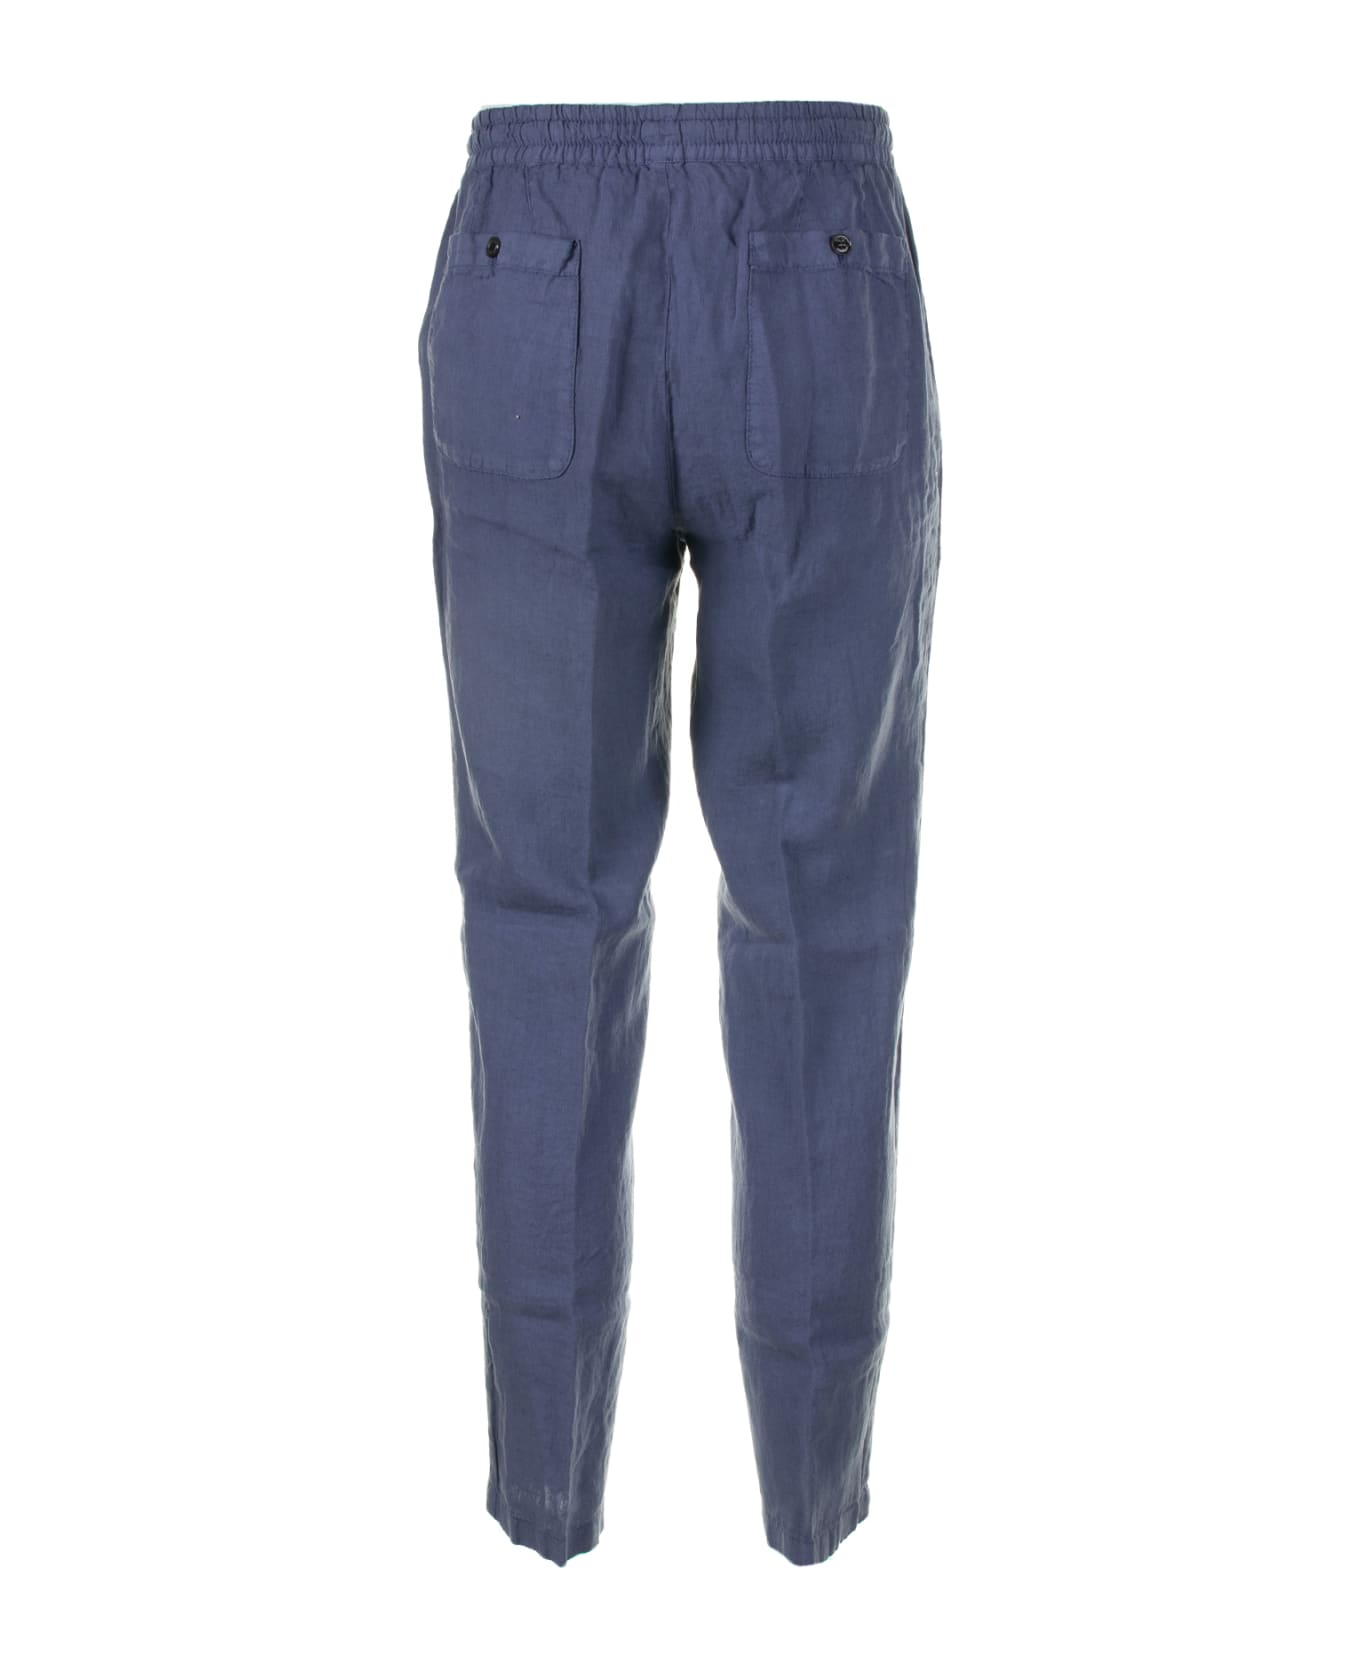 Altea Air Force Blue Linen Trousers With Drawstring - AVIO